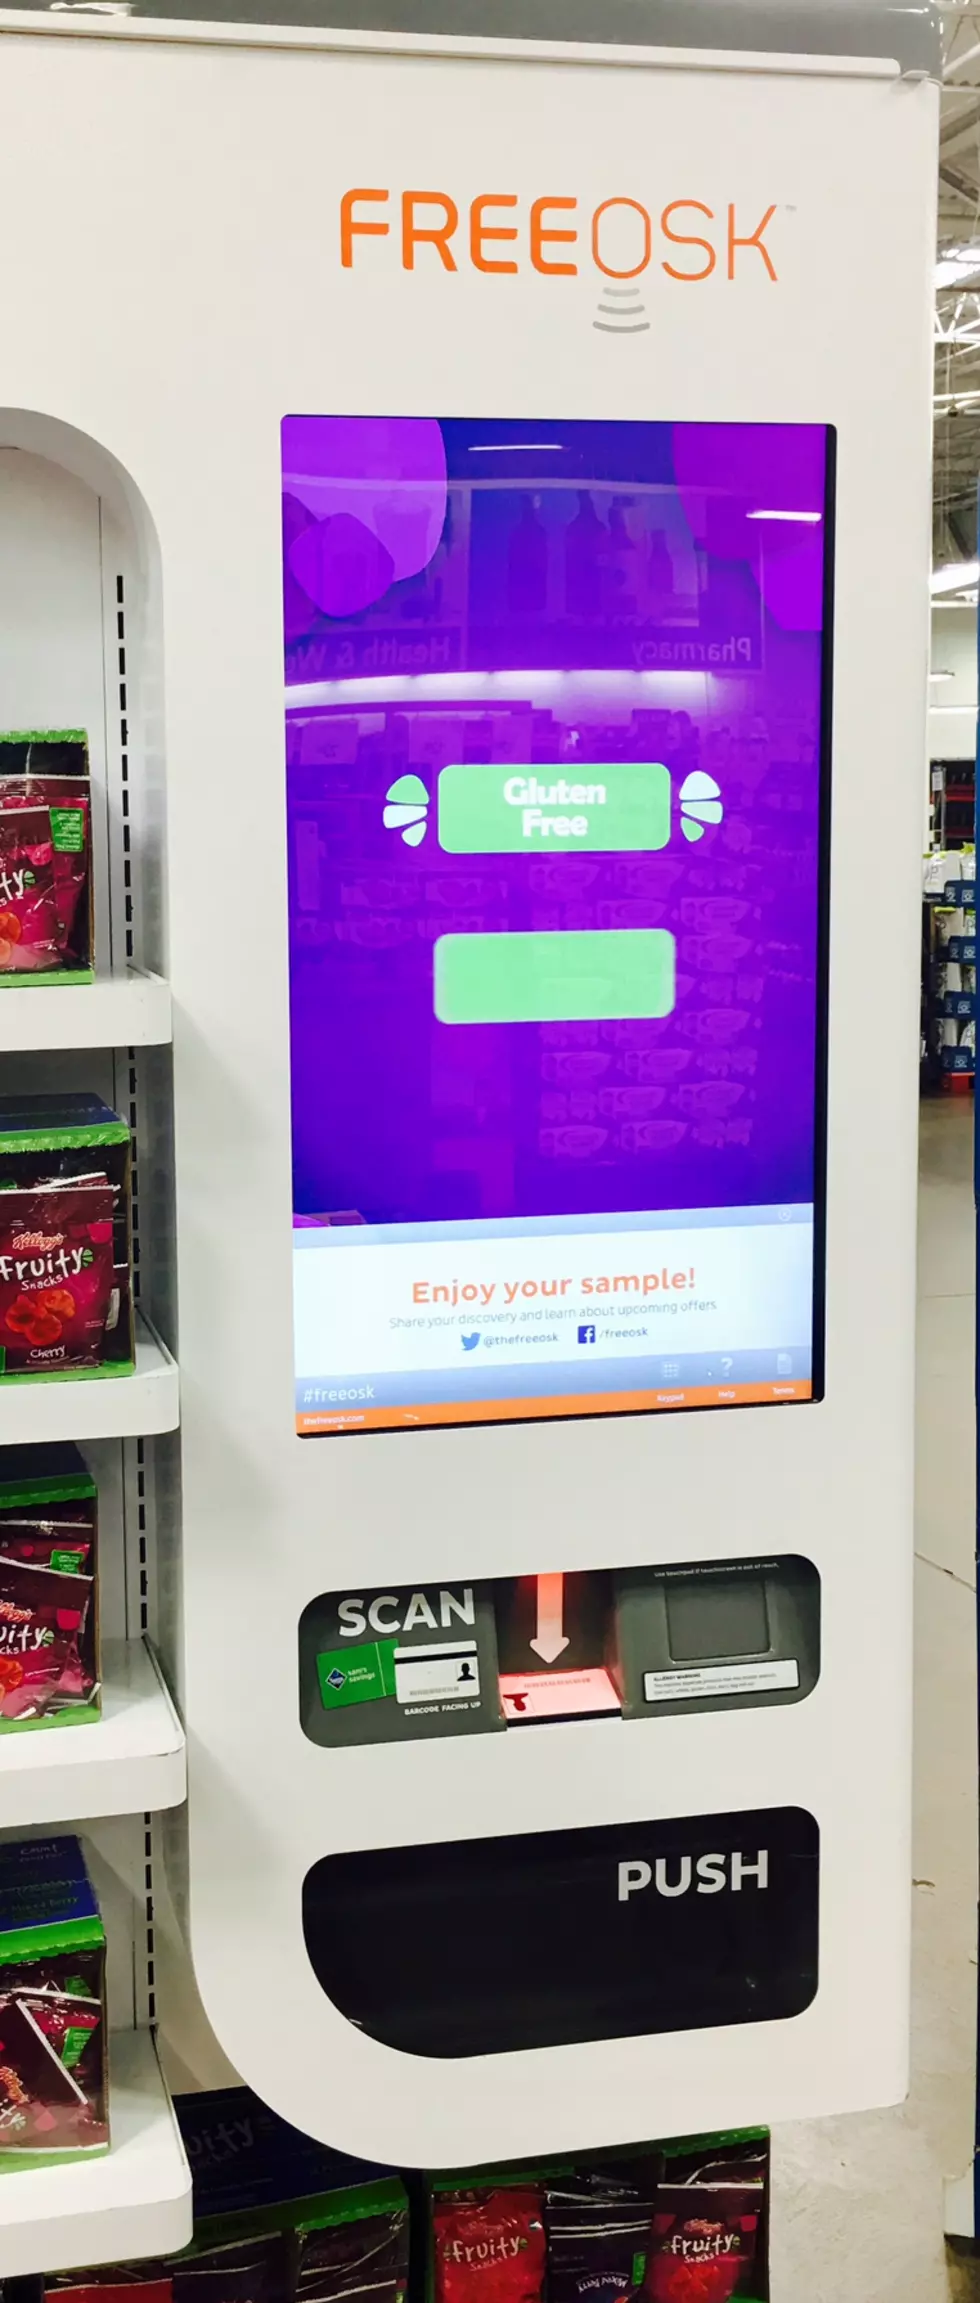 Sam&#8217;s Club in Evansville Has a FREEOSK &#8211; The Future of Sampling